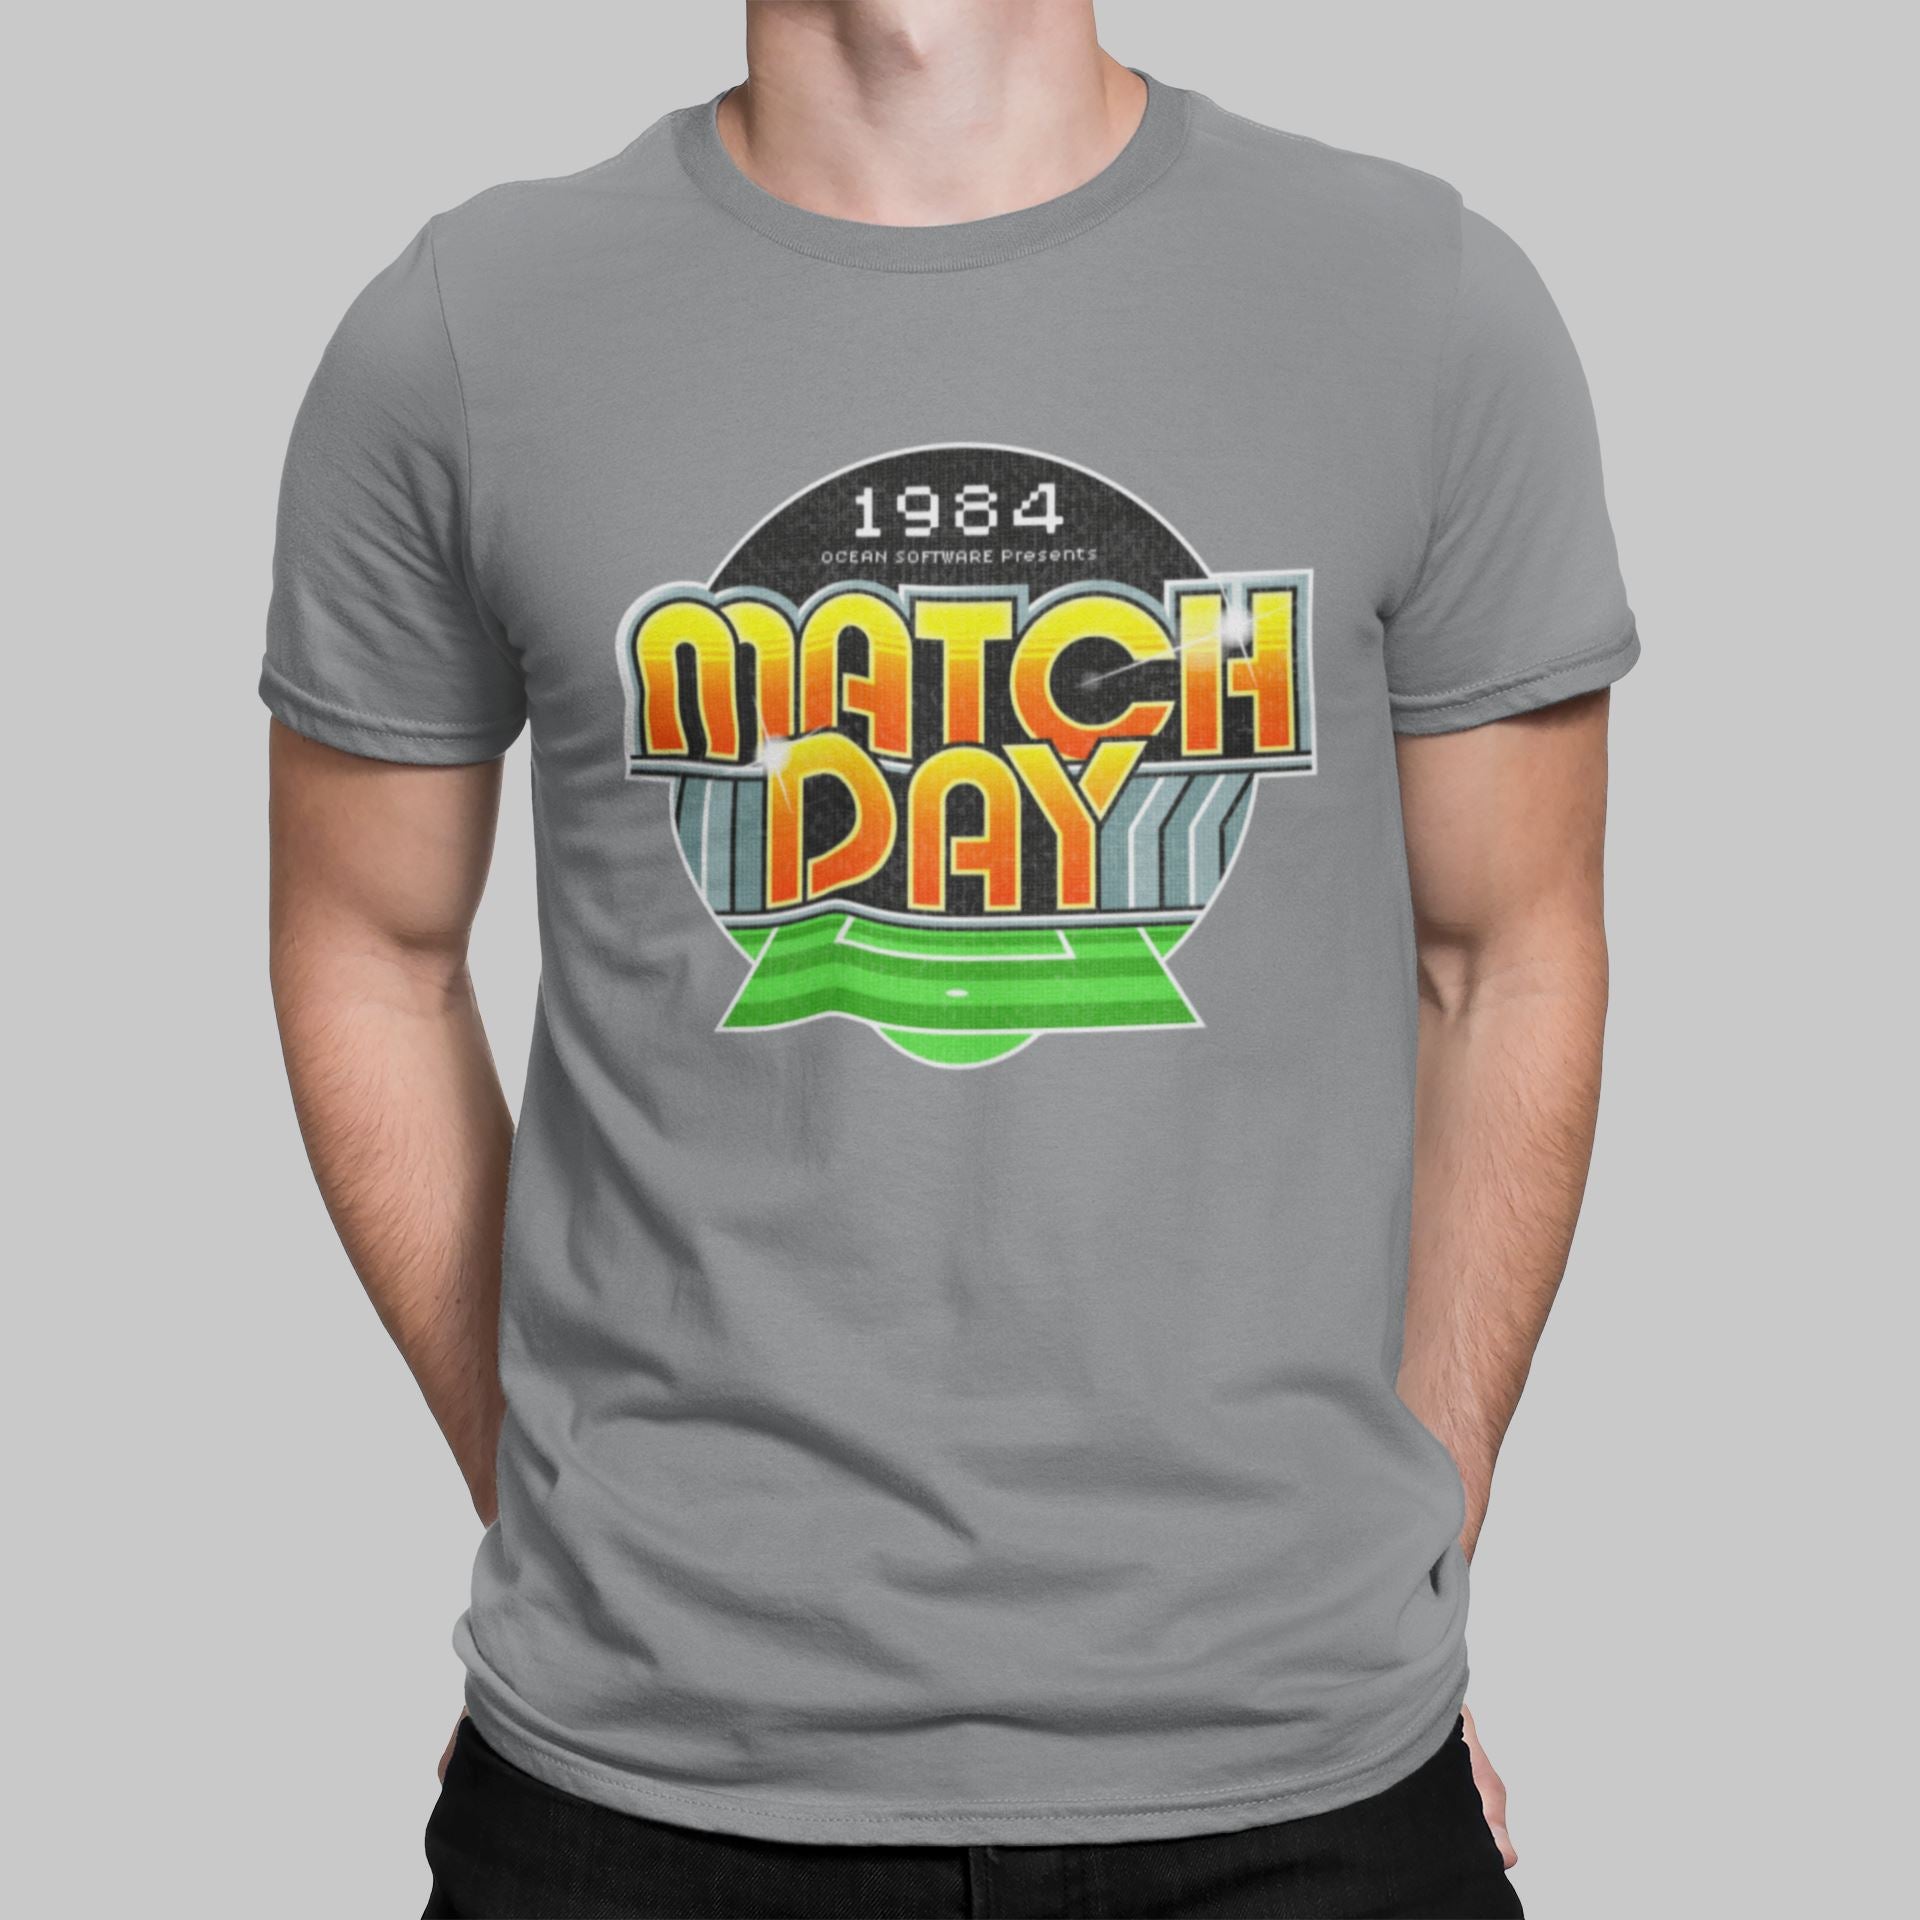 Match Day Retro Gaming T-Shirt T-Shirt Seven Squared Small 34-36" Sport Grey 